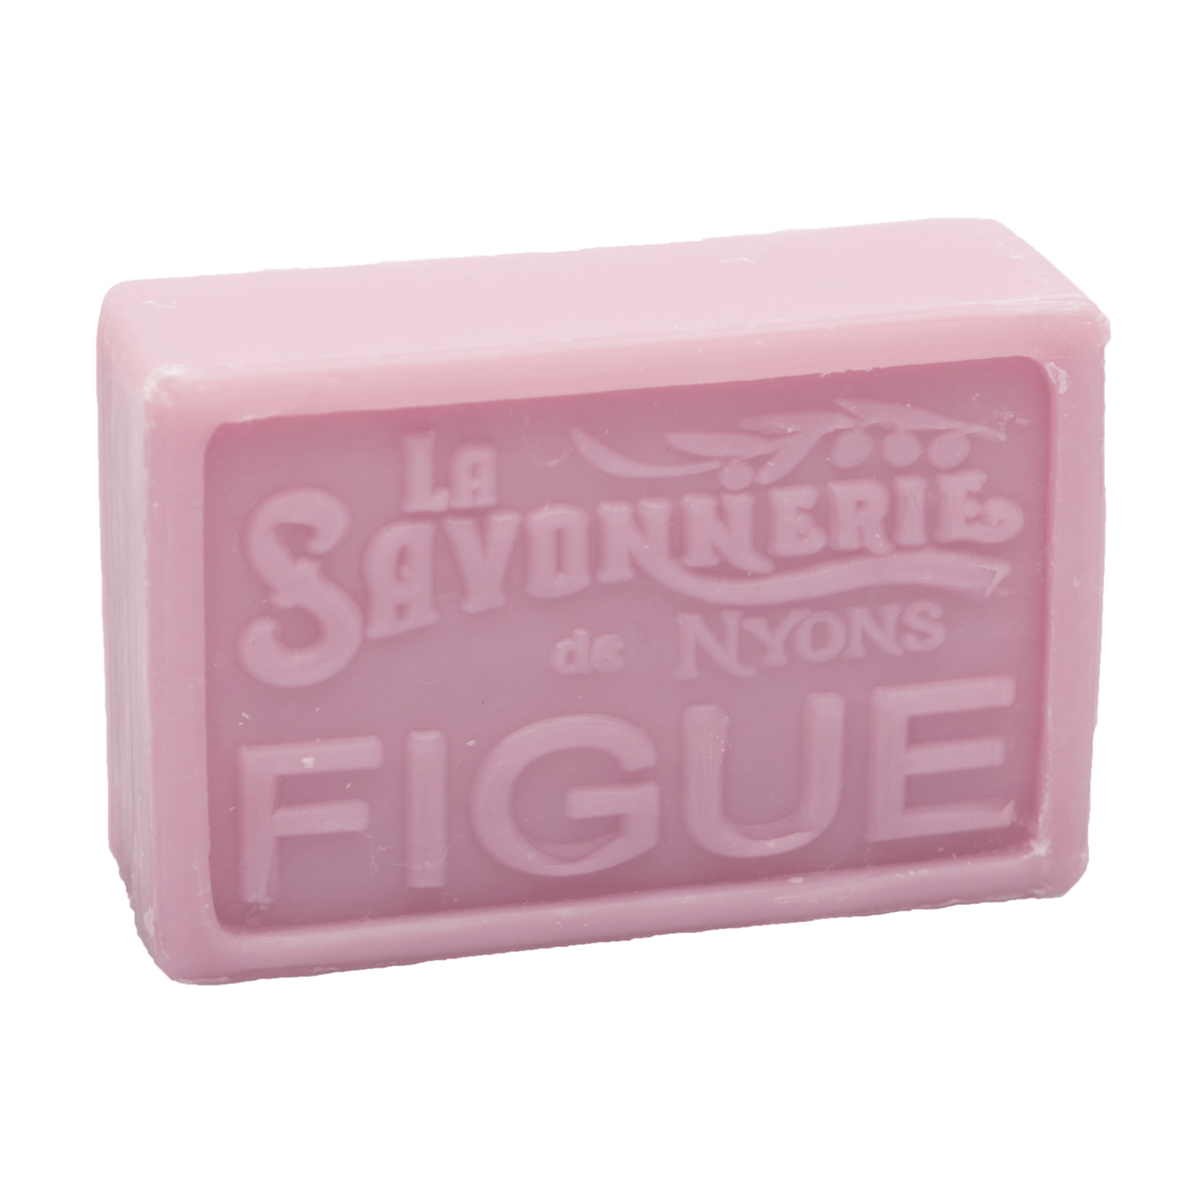 A bar of pale pink La Savonnerie de Nyons Provence Fig Soap 100g with "la savonnerie de nyons figue" embossed on it, against a white background.